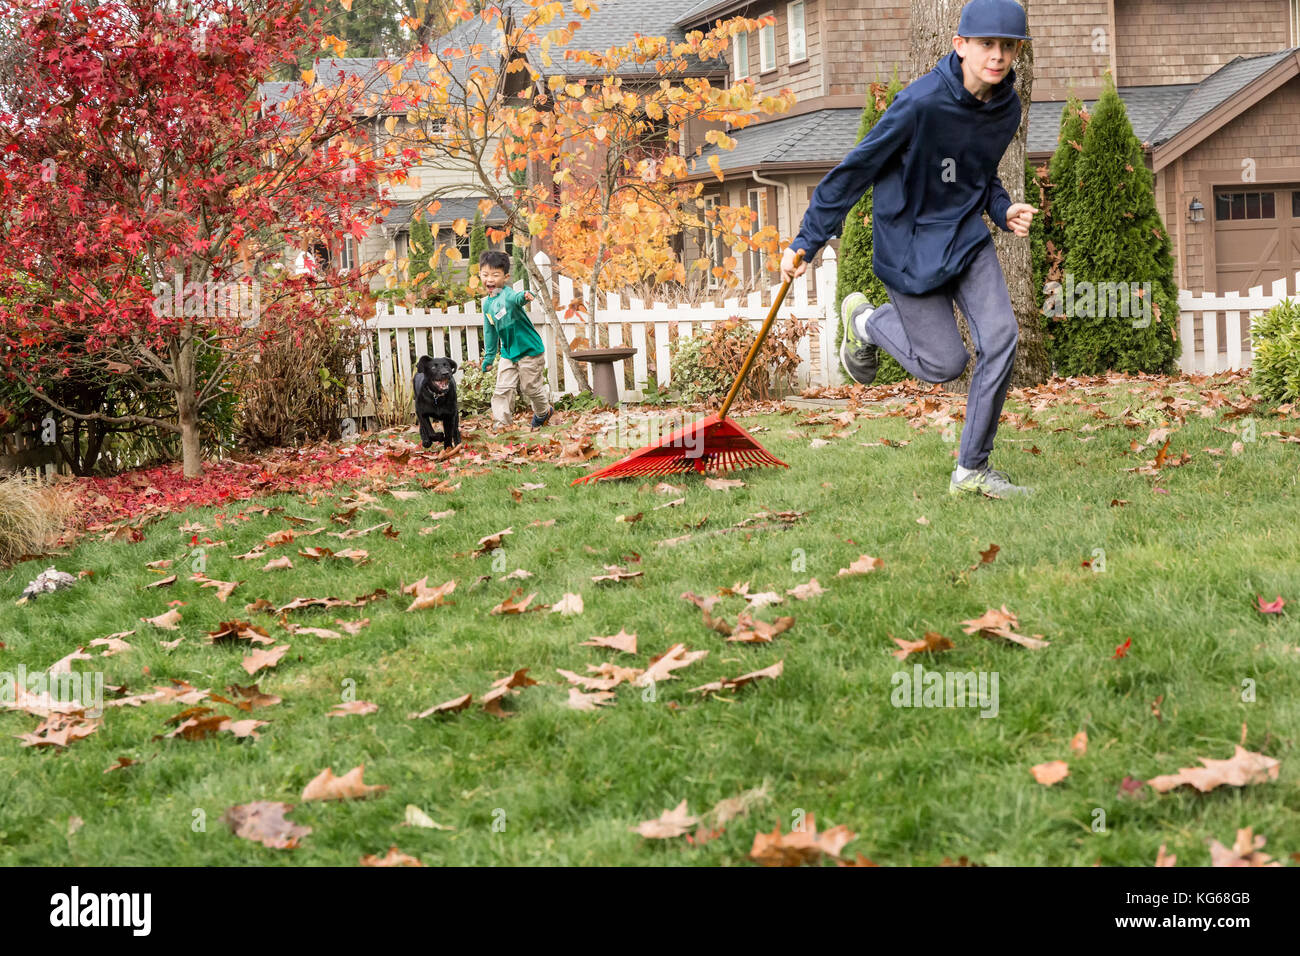 'Shadow', a three month old black Labrador Retriever puppy, chasing after a twelve year old boy pulling a rake behind him in Bellevue, Washington, USA Stock Photo